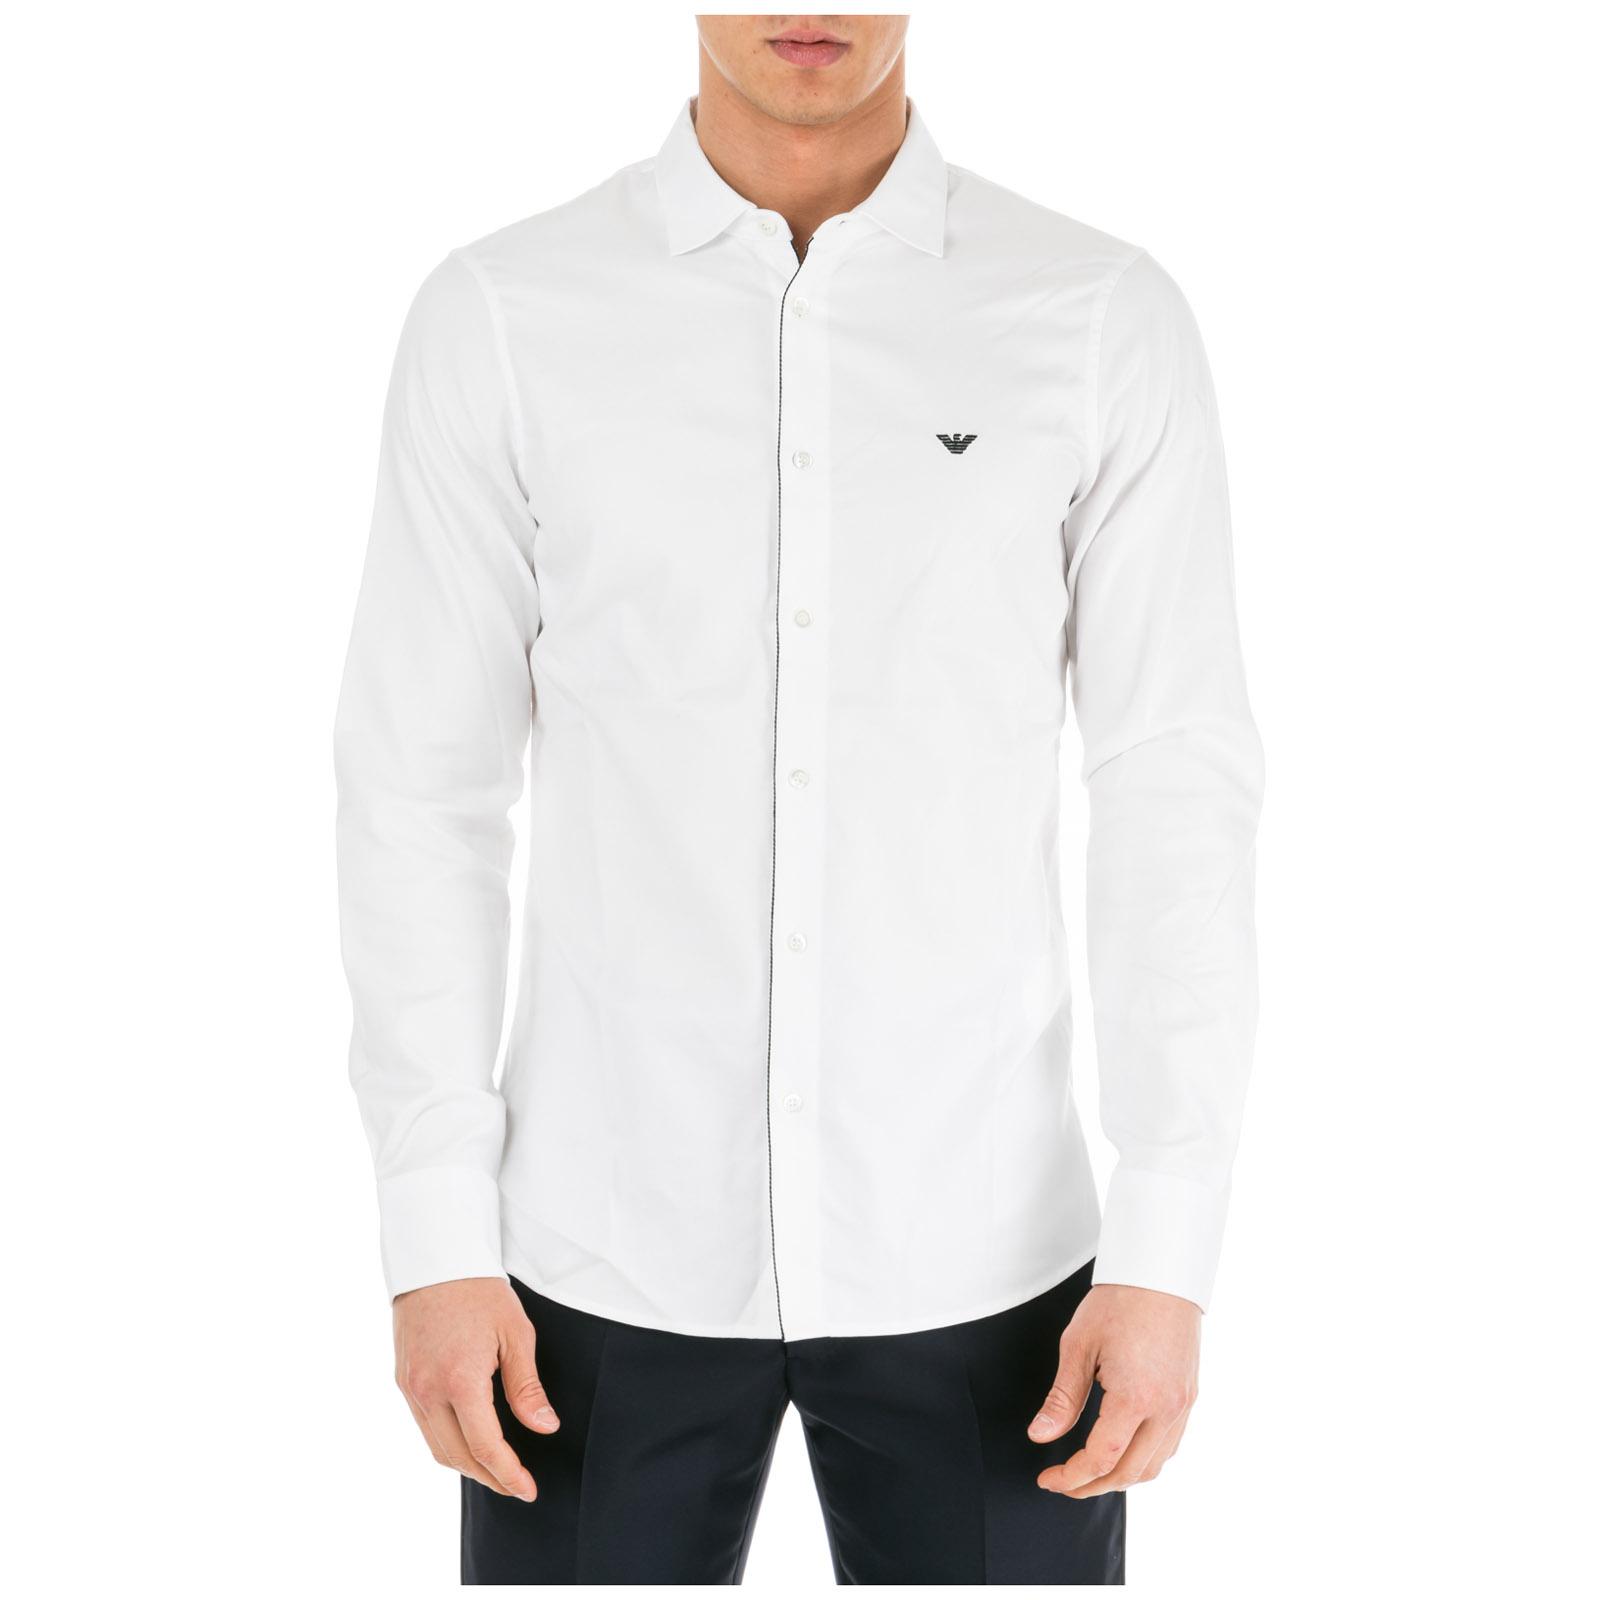 Emporio Armani Long Sleeve Shirt Dress Shirt Regular Fit in White for ...